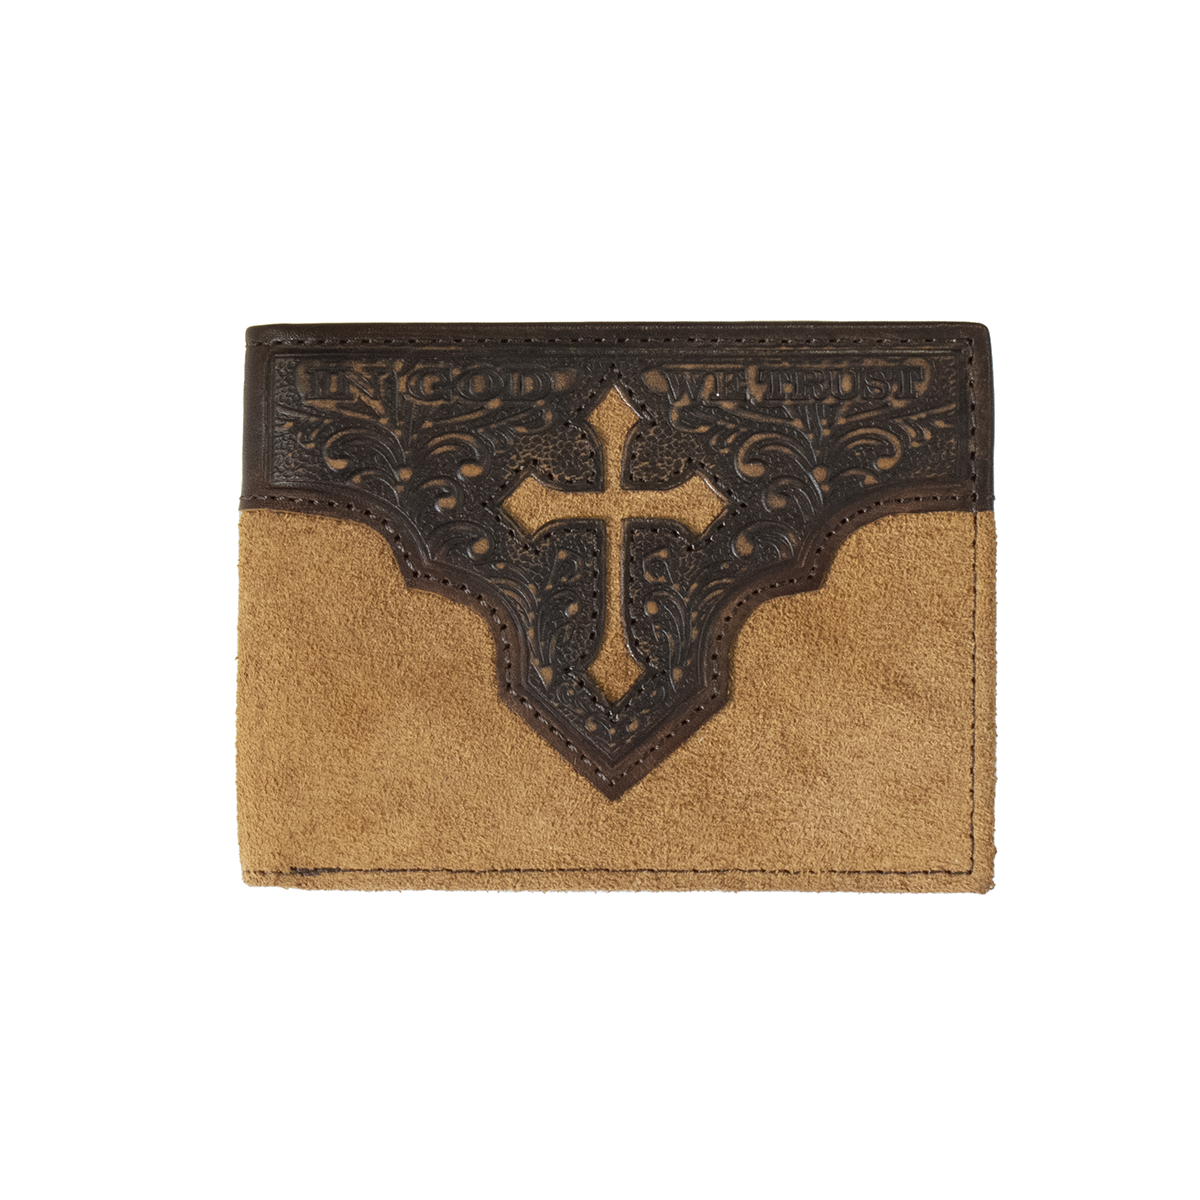 Nocona Bifold Wallet - Tan Embroidered w/Cross